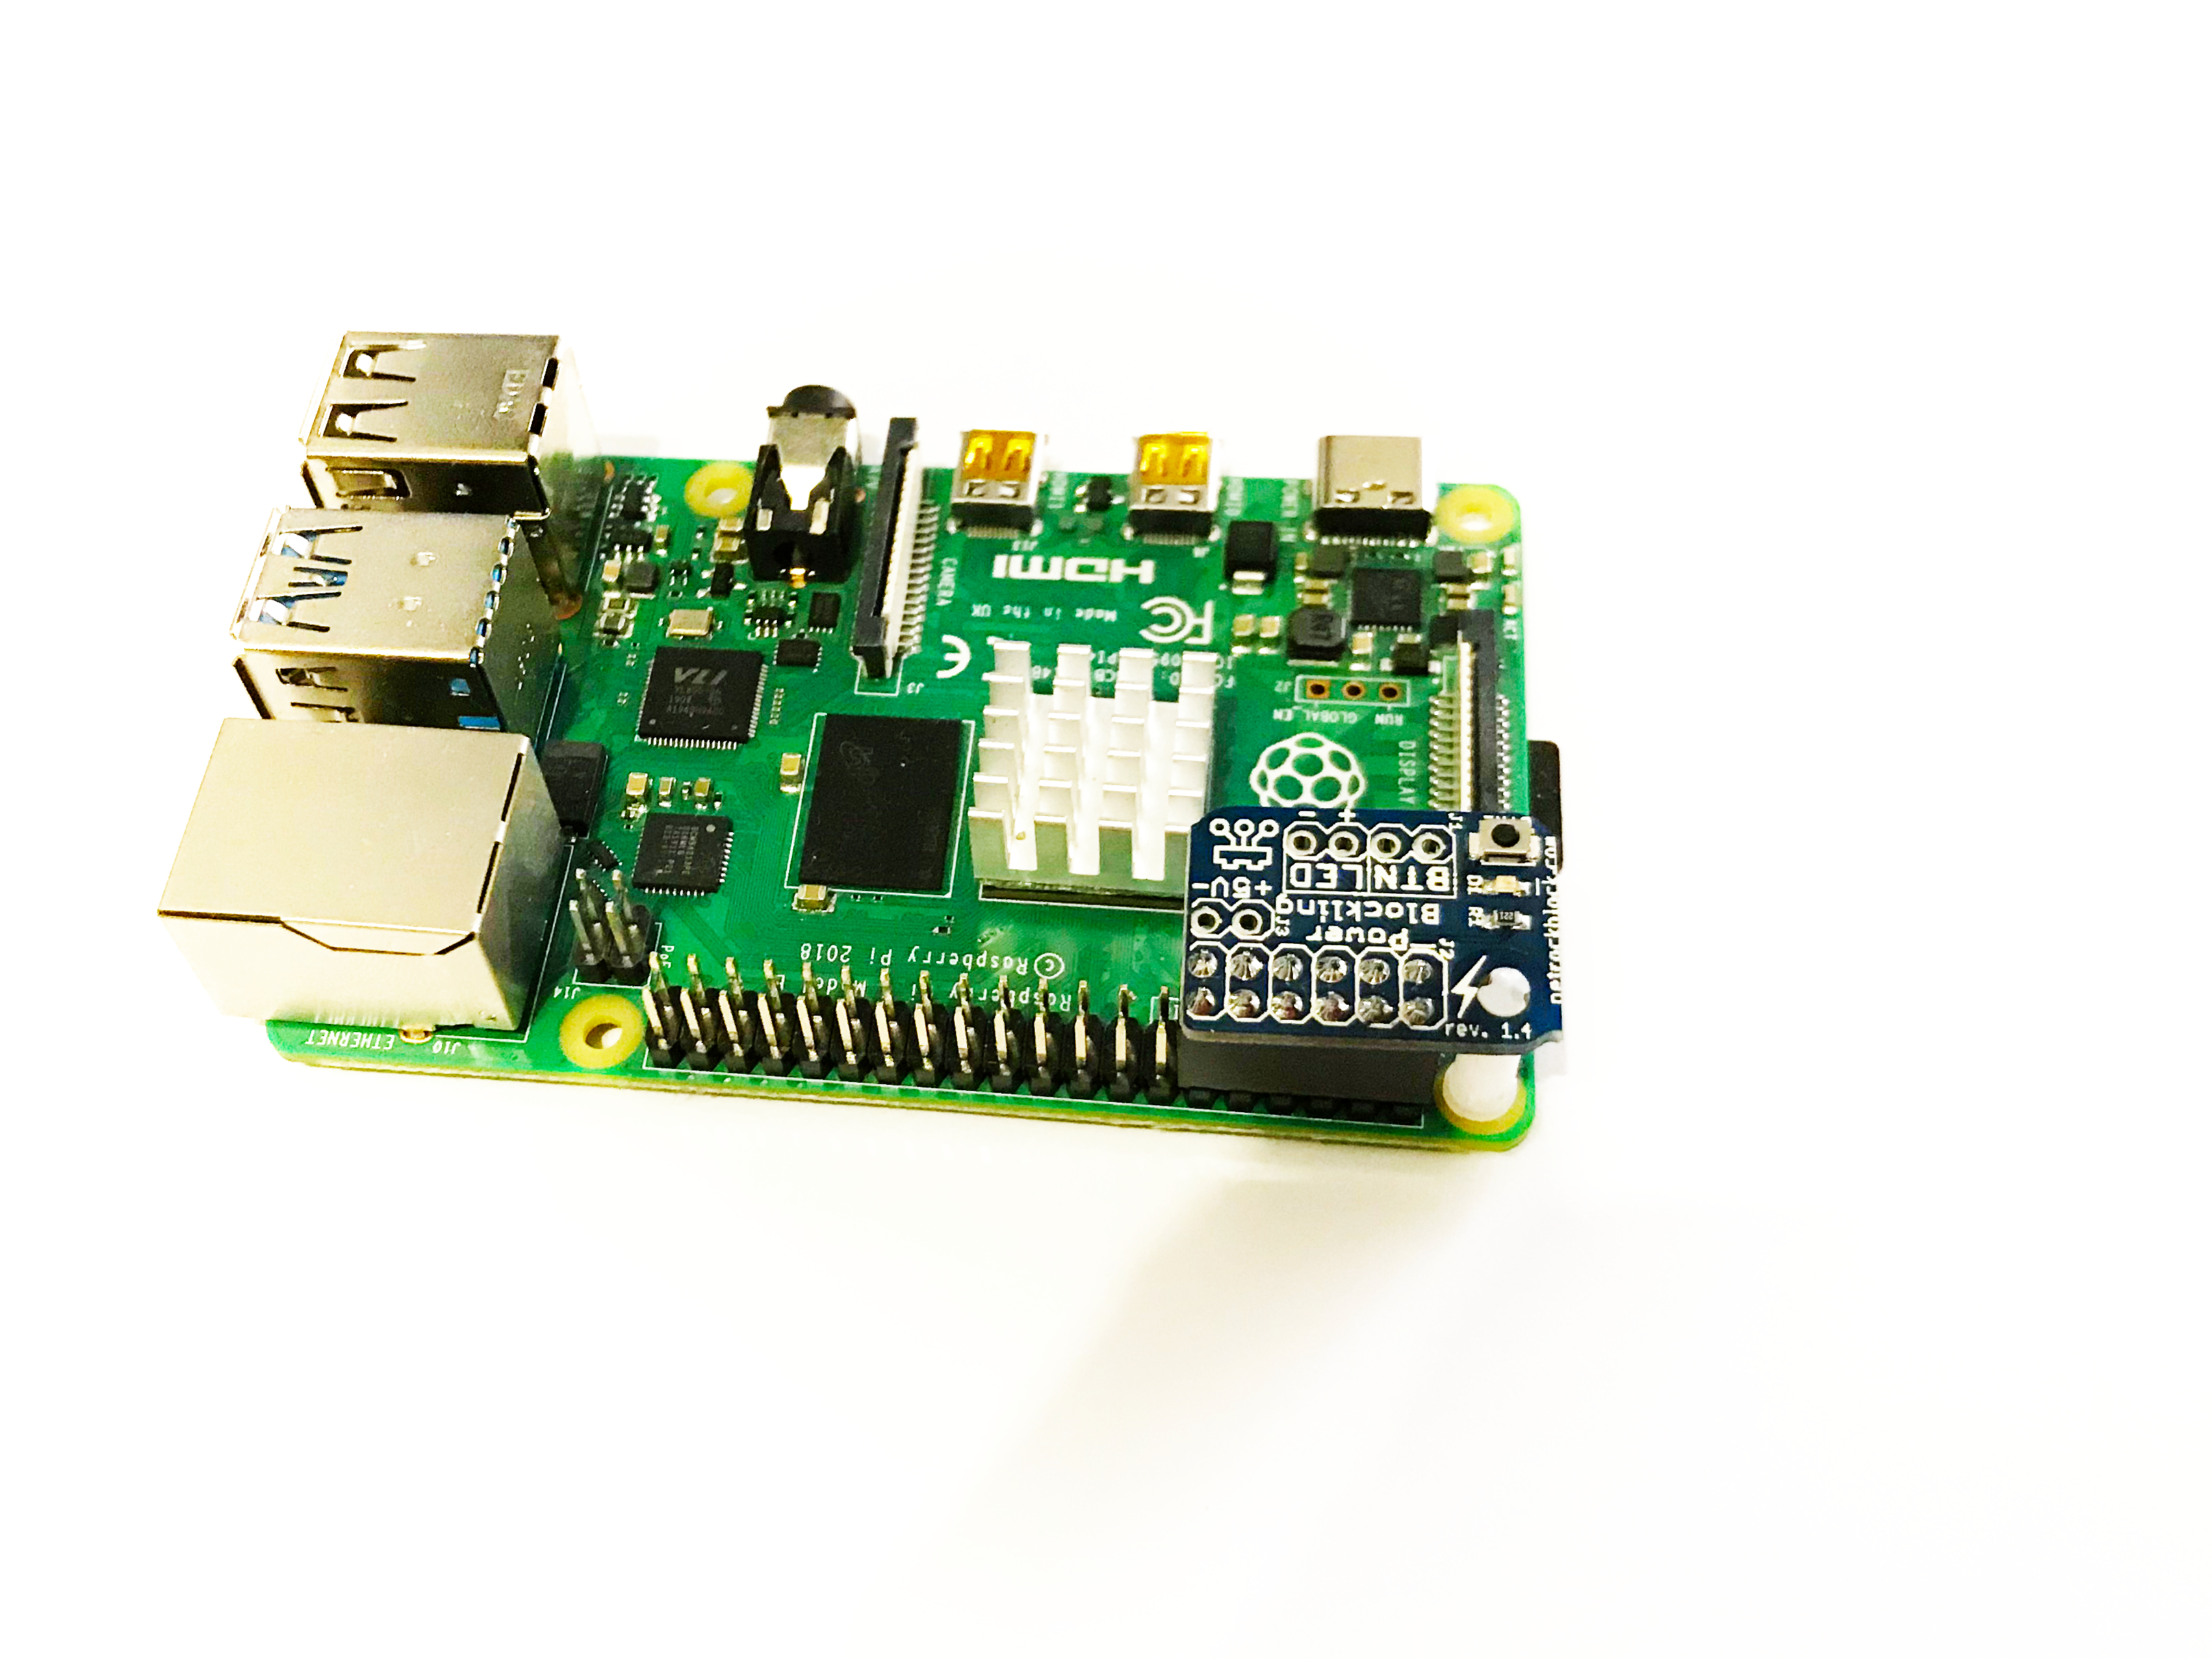 PowerBlockling attached to Raspberry Pi